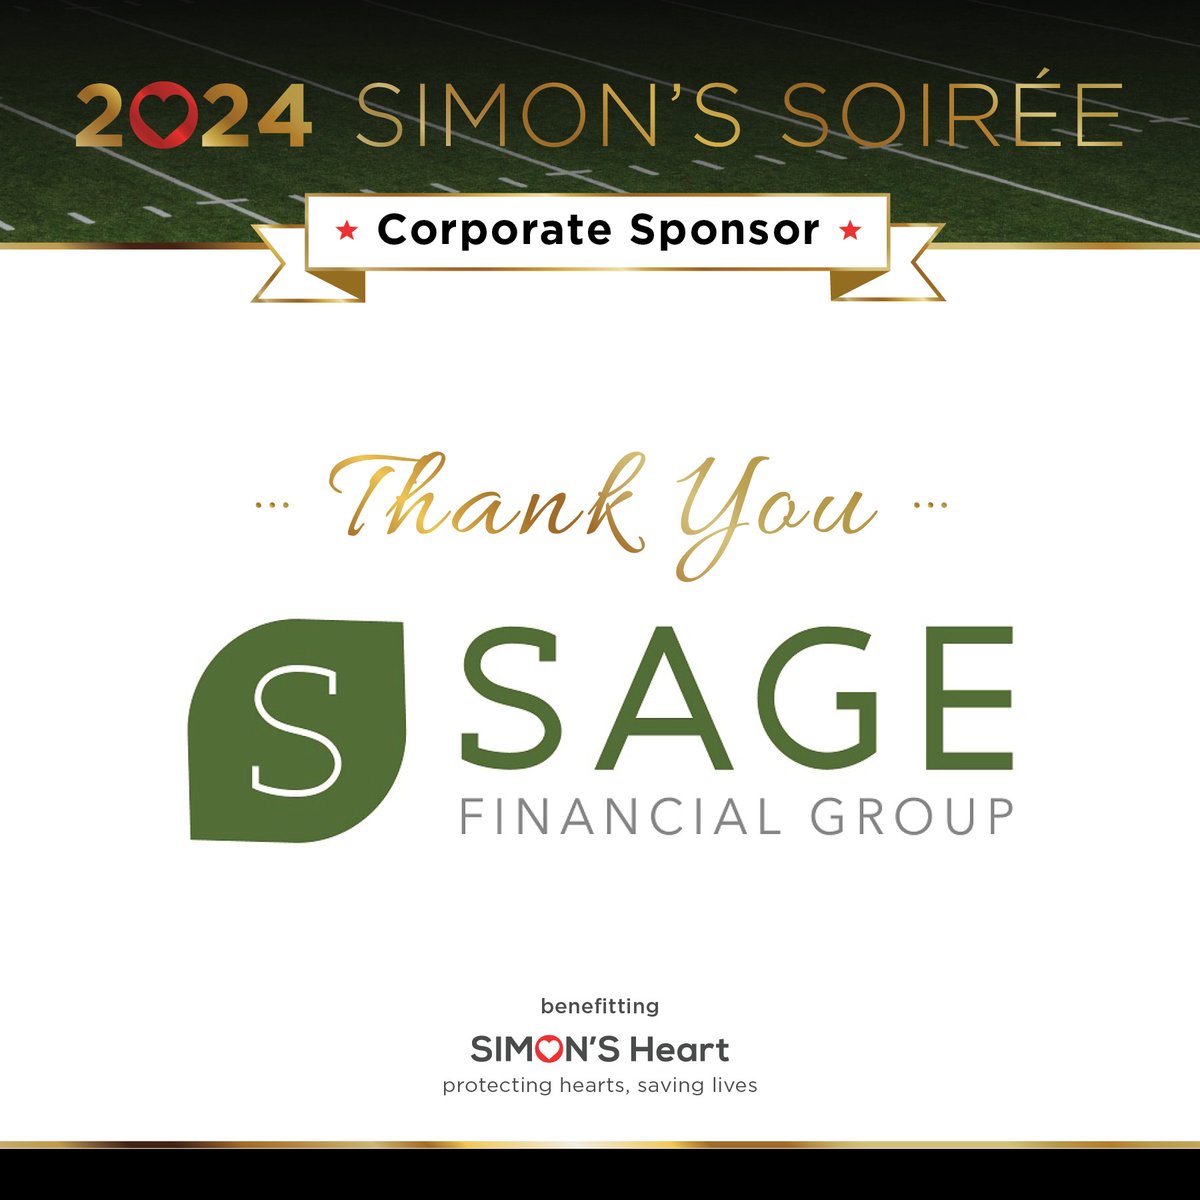 Today, we want to express immense gratitude to Sage Financial for their support since the early days of Simon’s Heart. Mitch Bednoff, a dedicated Principal at Sage and a crucial member of our Board has been instrumental in saving lives and guiding our organization’s growth.